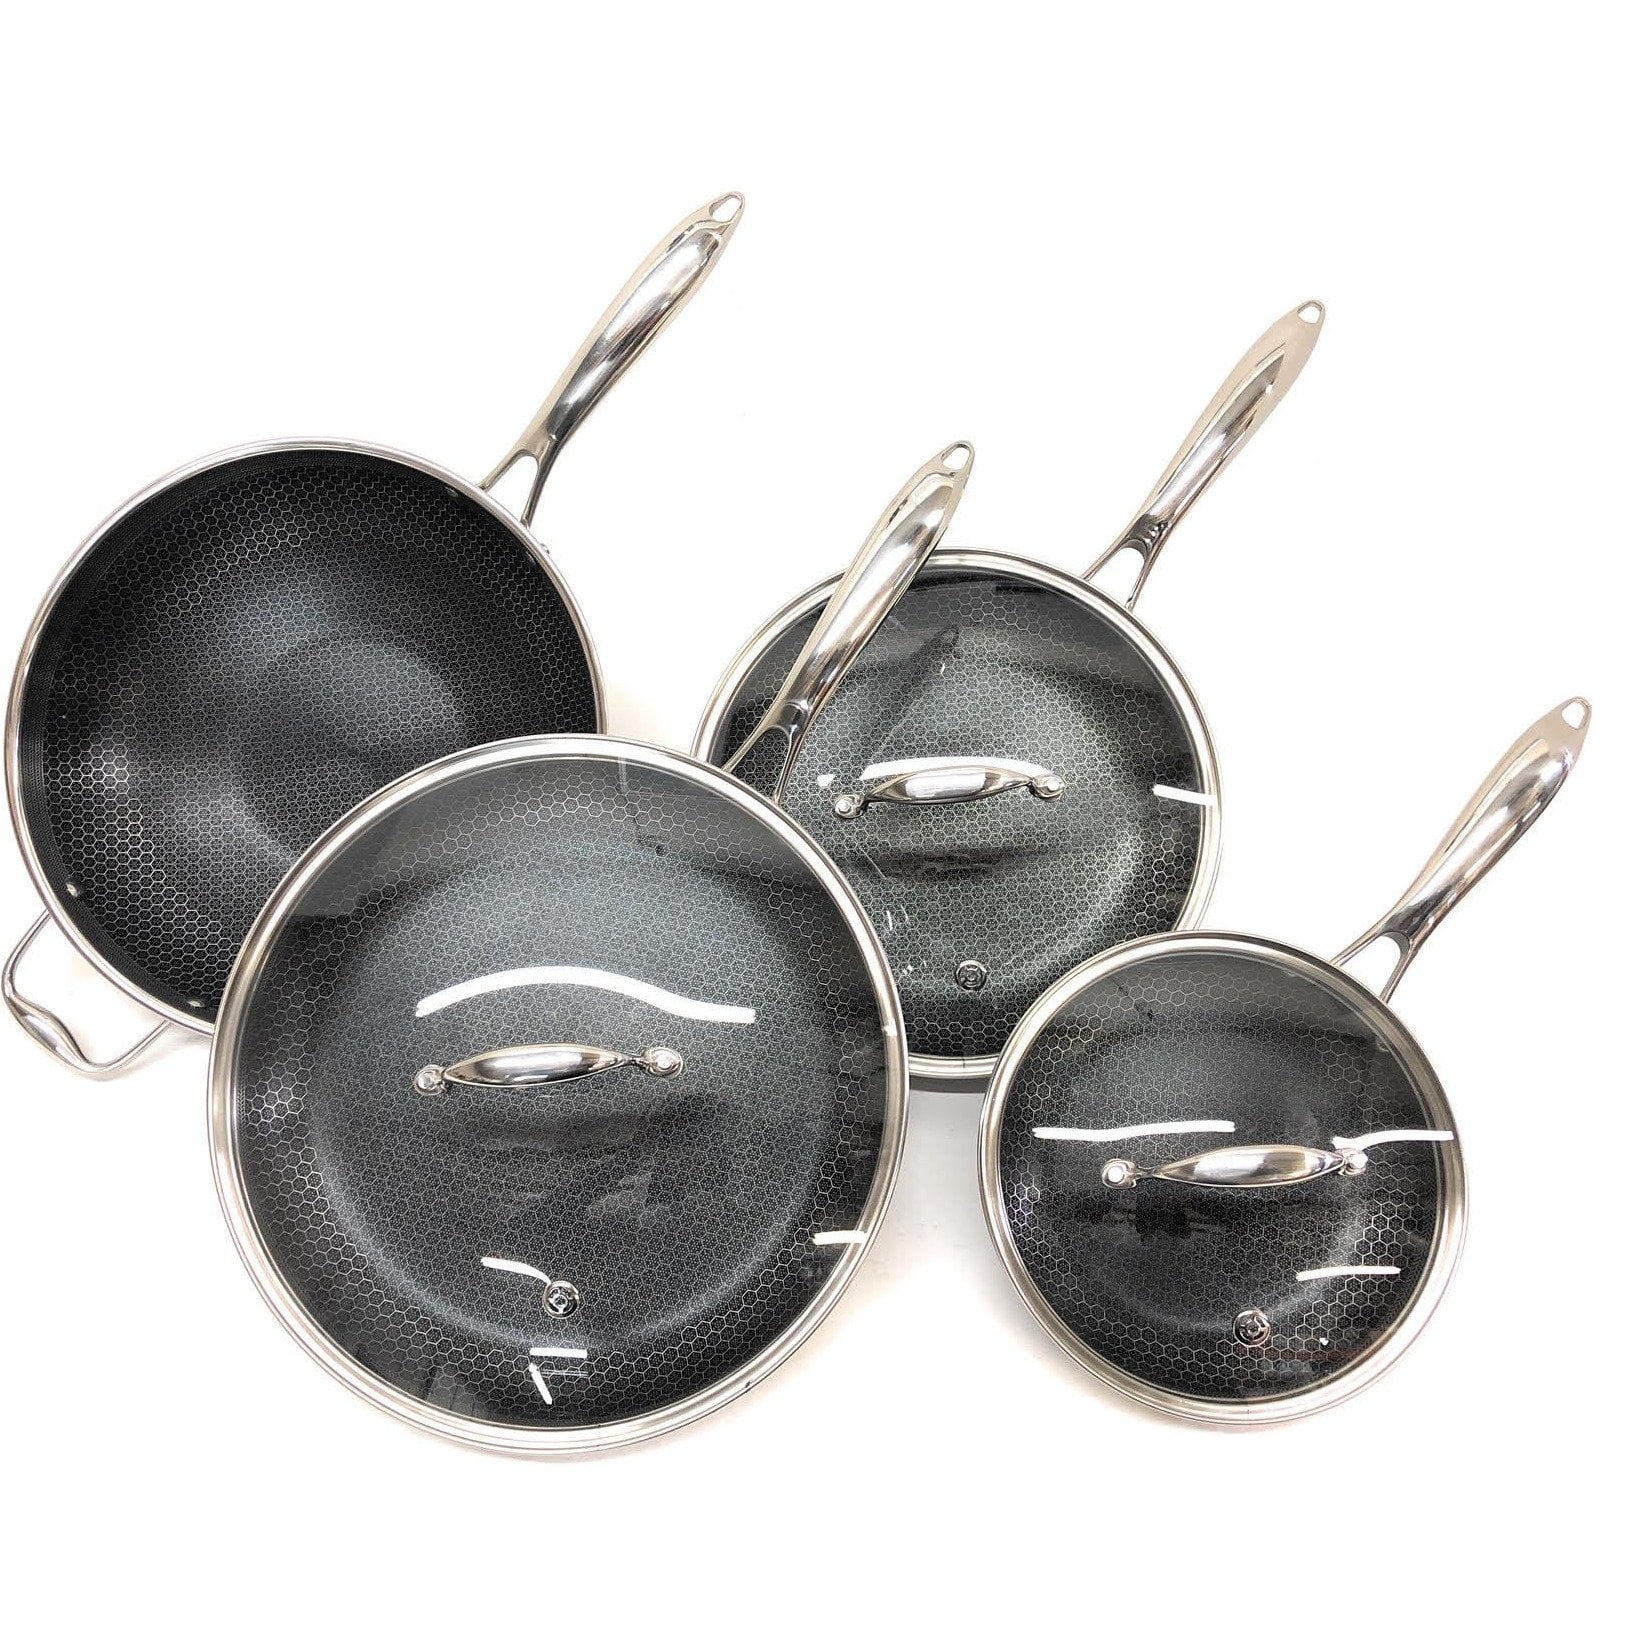 PFOA-Free Induction Ready Metal Utensil and Dishwasher Safe Easy to Clean Non Stick Fry Pan with Covers HexClad 7-Piece Hybrid Stainless Steel Cookware Set with Lids and Wok